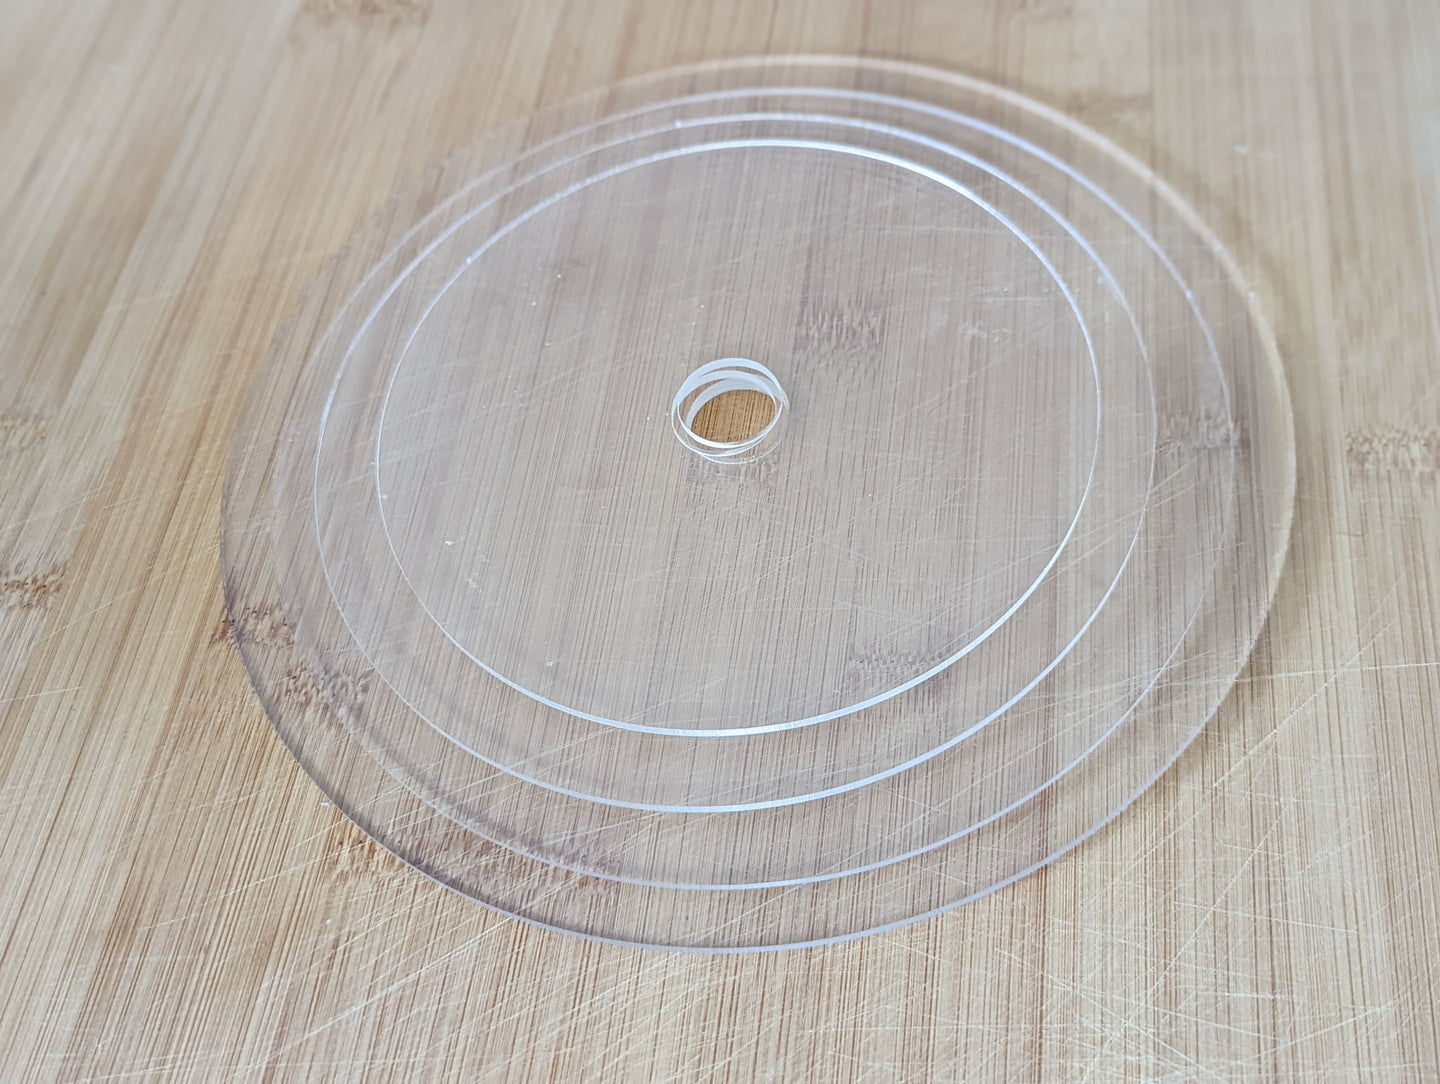 Ganache lids with optional hole for central dowel